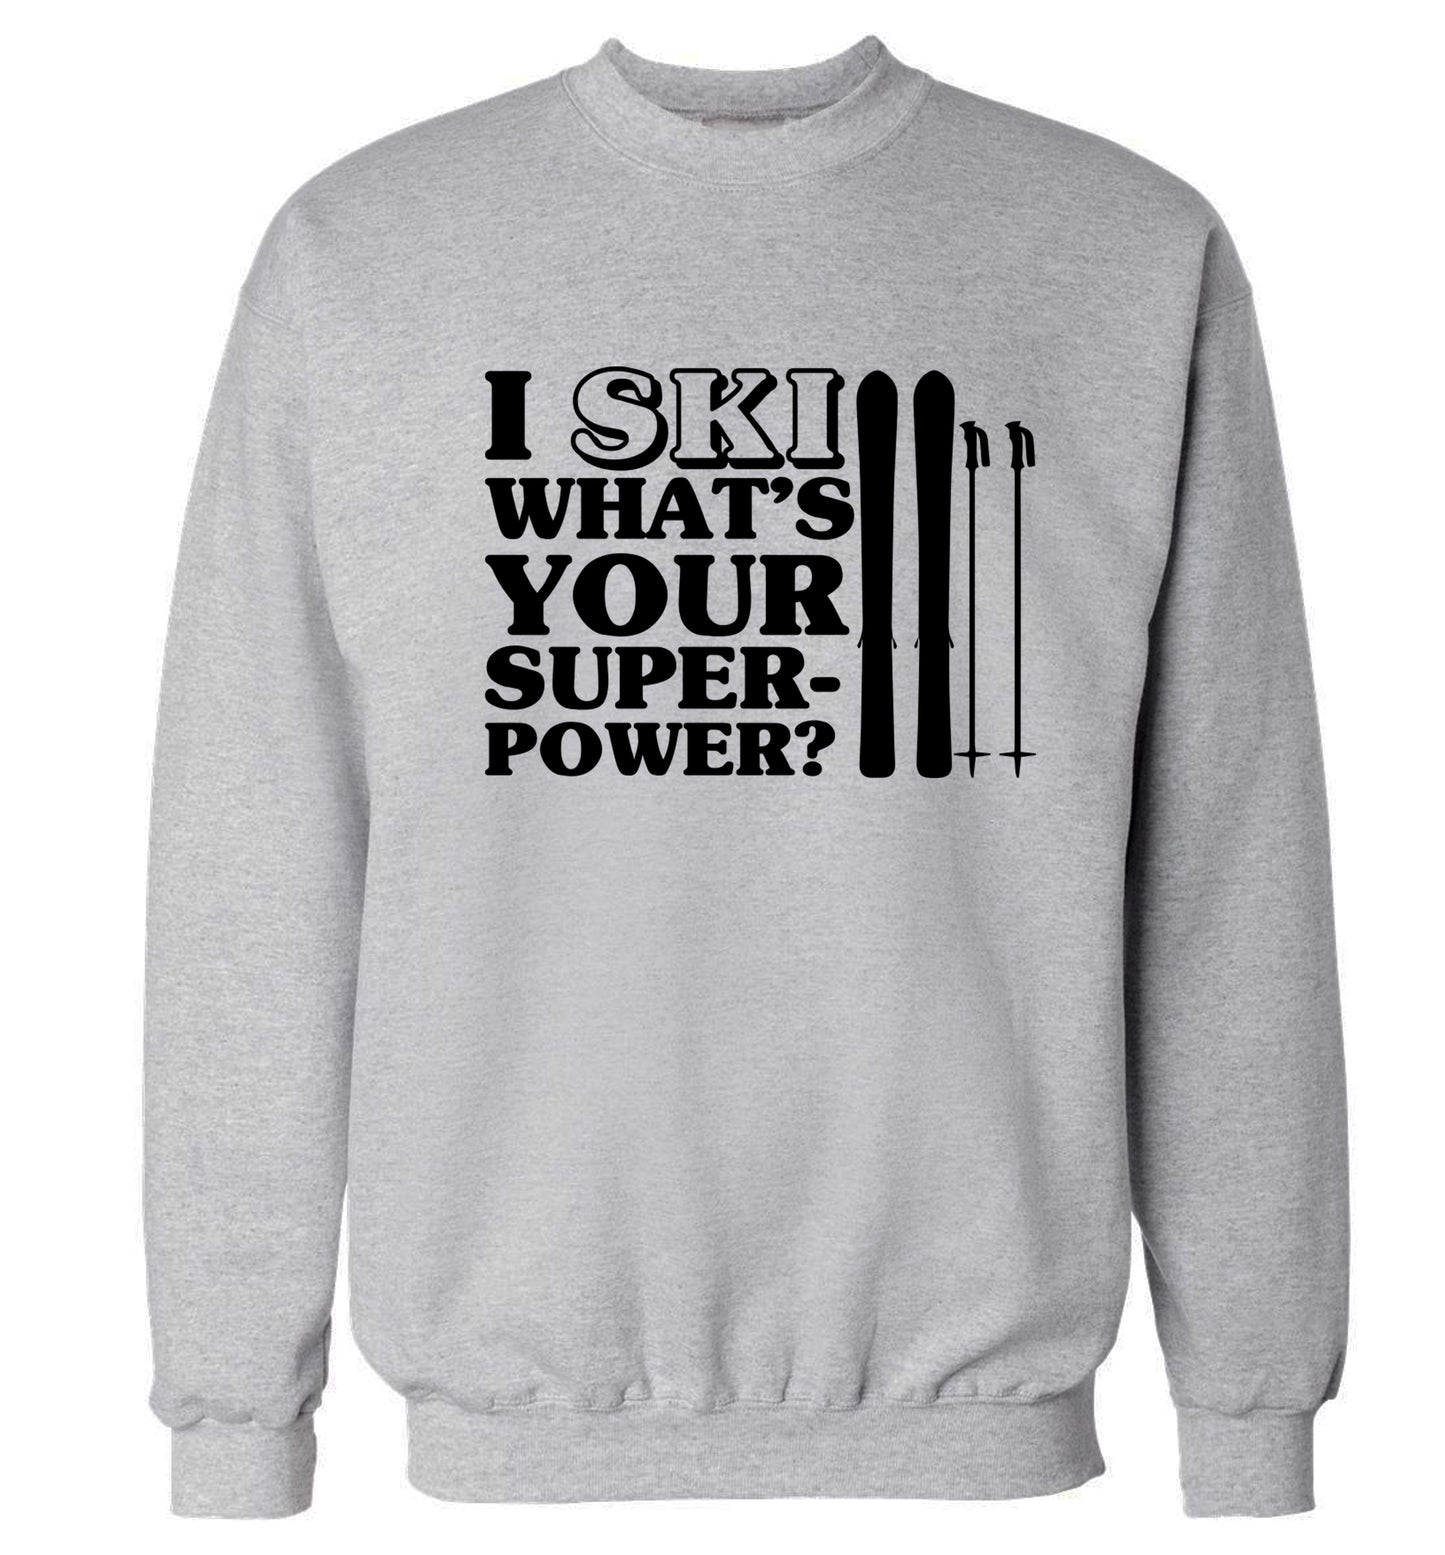 I ski what's your superpower? Adult's unisexgrey Sweater 2XL